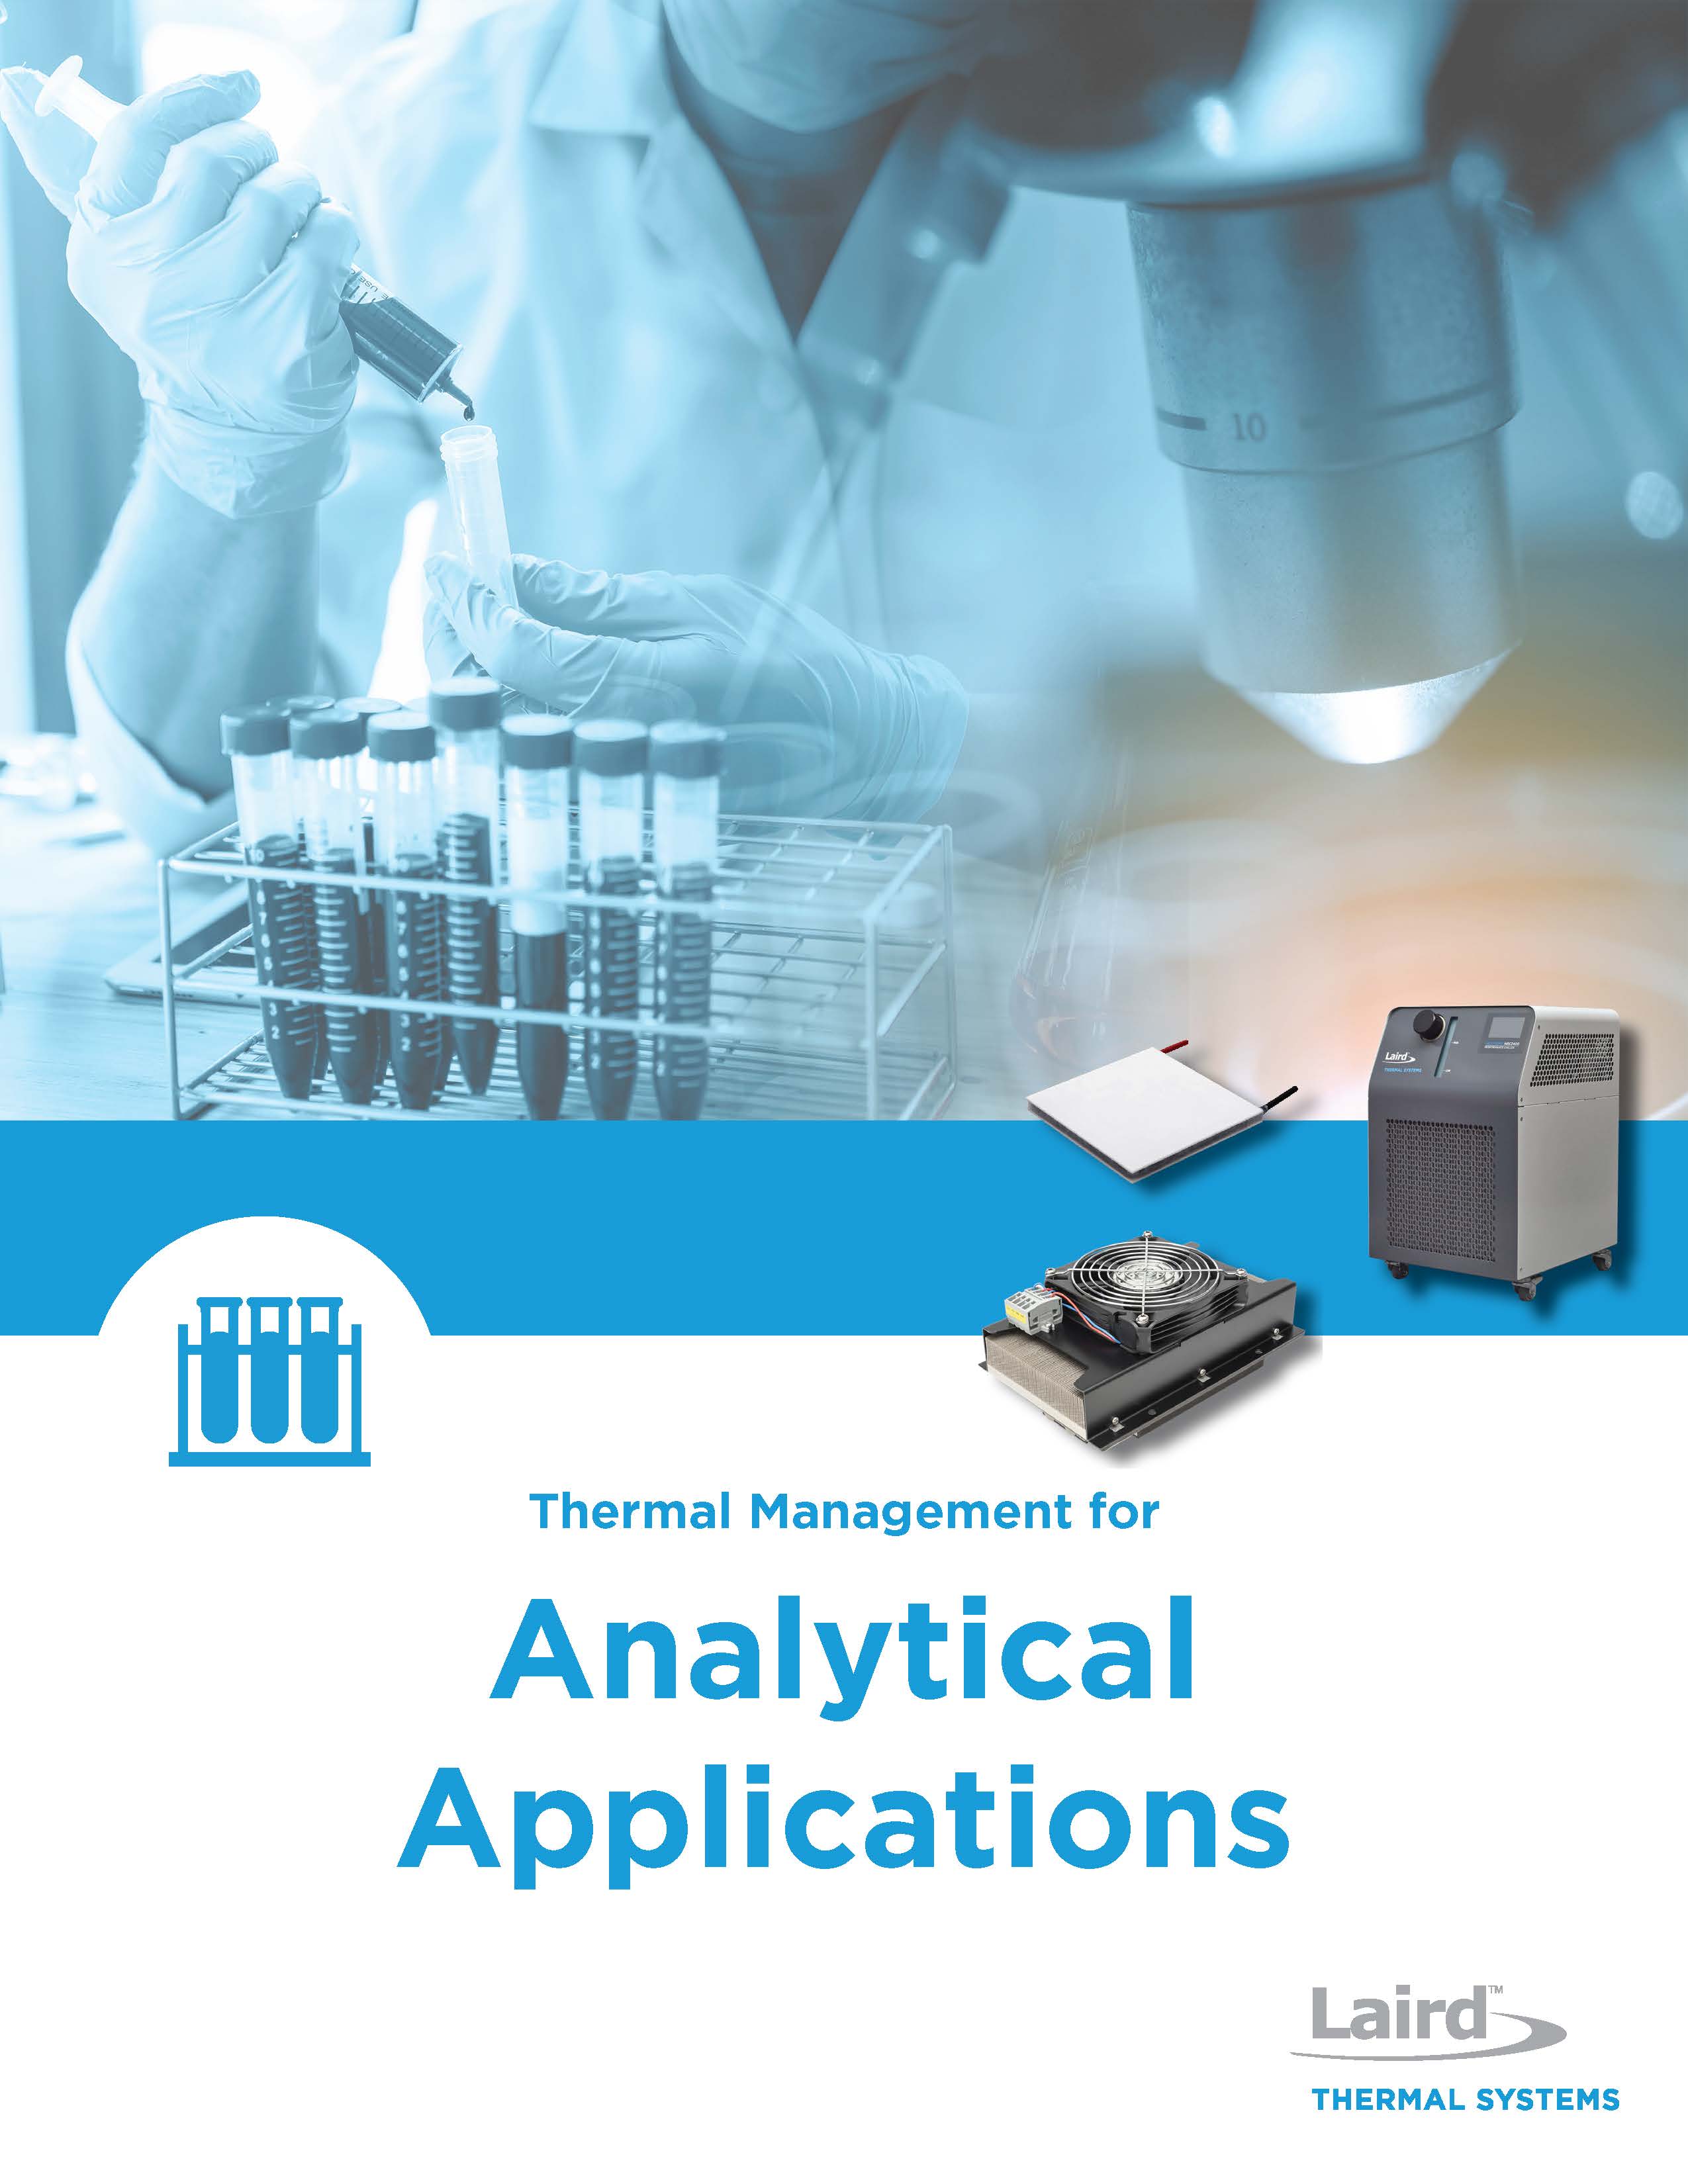 Analytical-applications-brochure